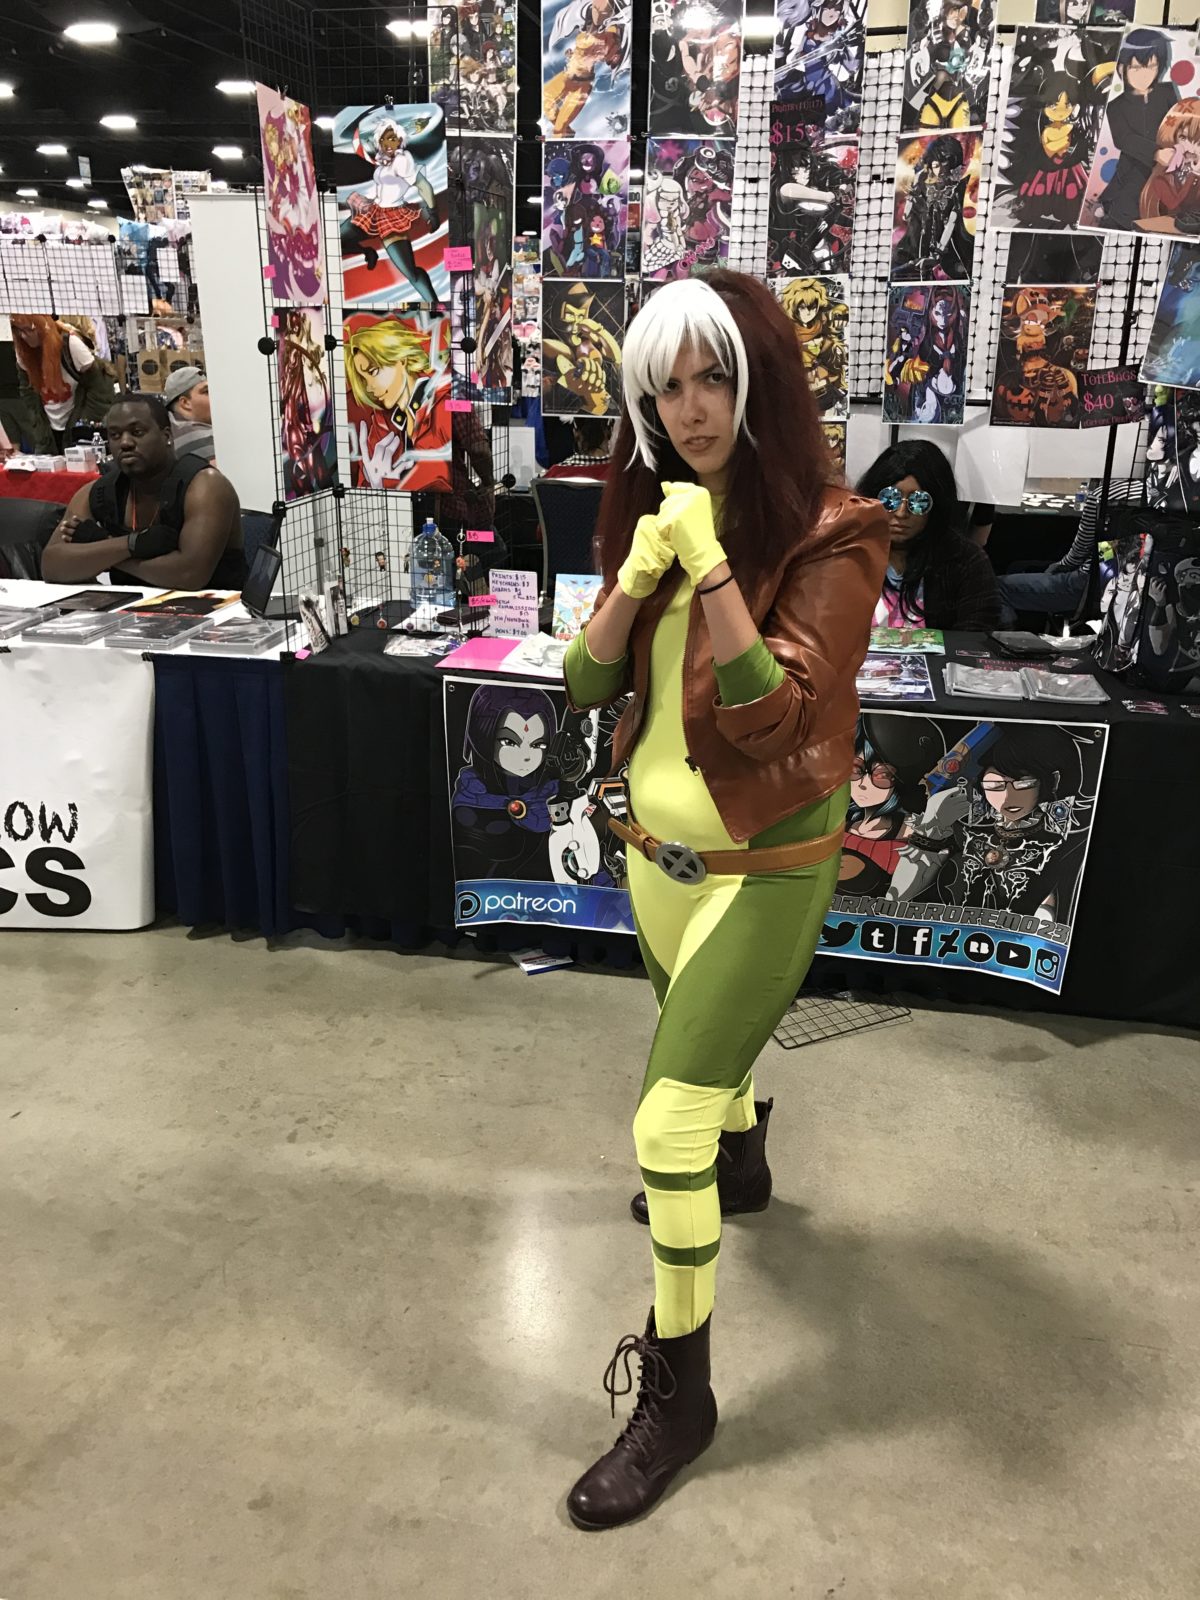 SUPER CosViews from Fort Lauderdale SUPERCON:  ROGUE came to Absorb some fun